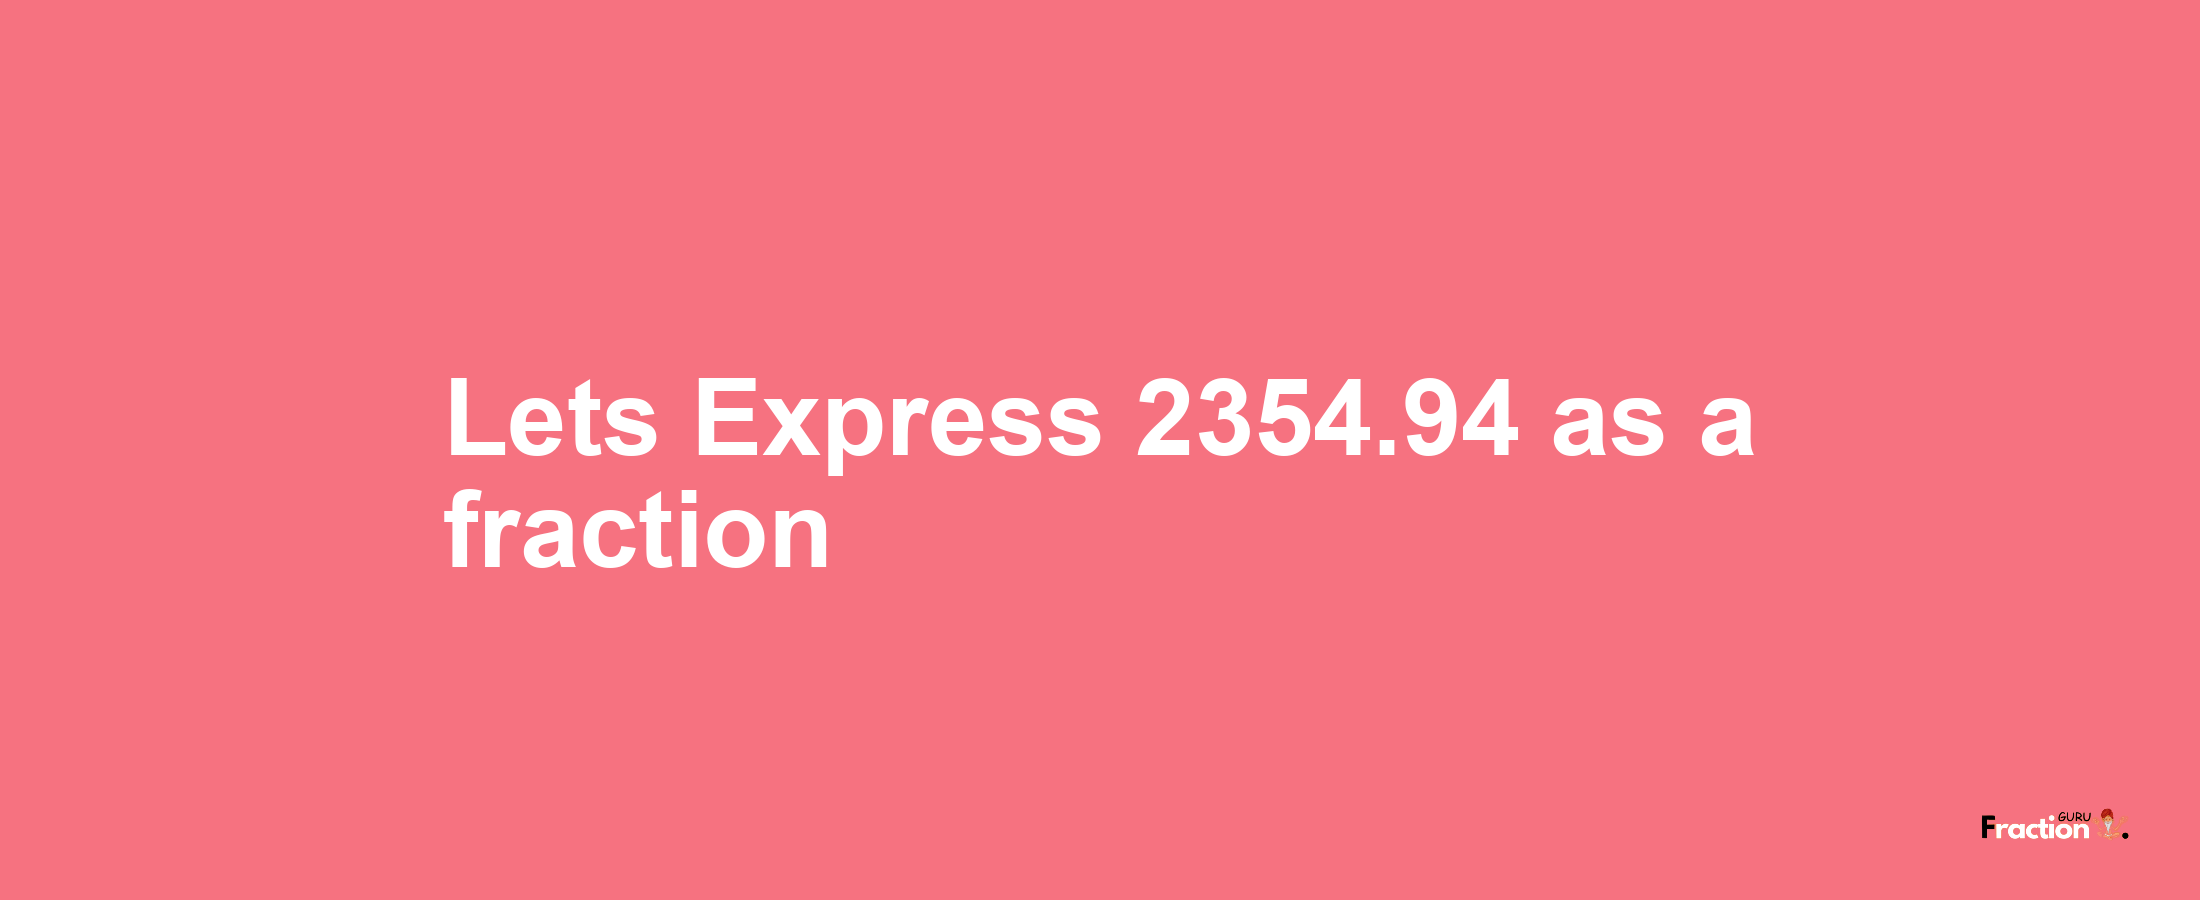 Lets Express 2354.94 as afraction